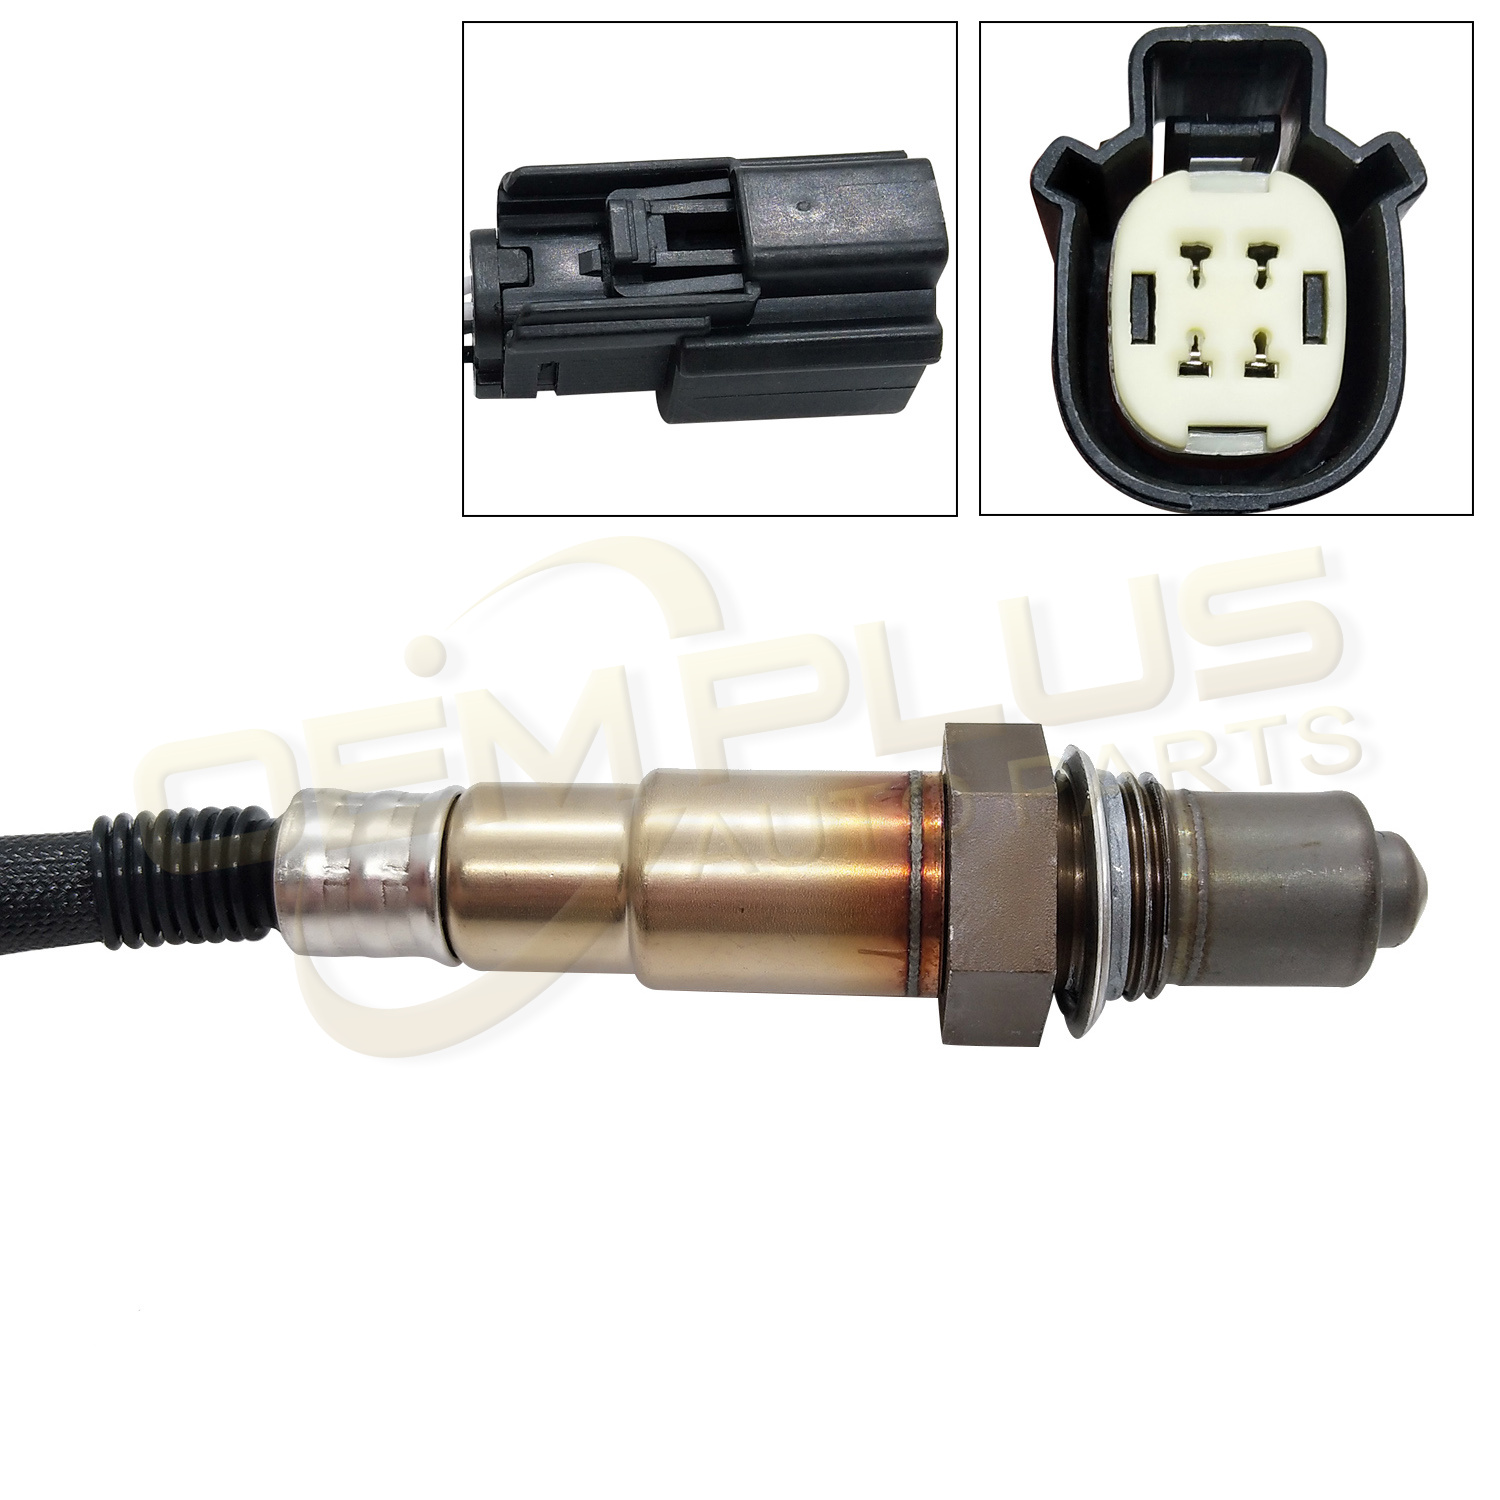 2012 ford explorer fuel pump replacement